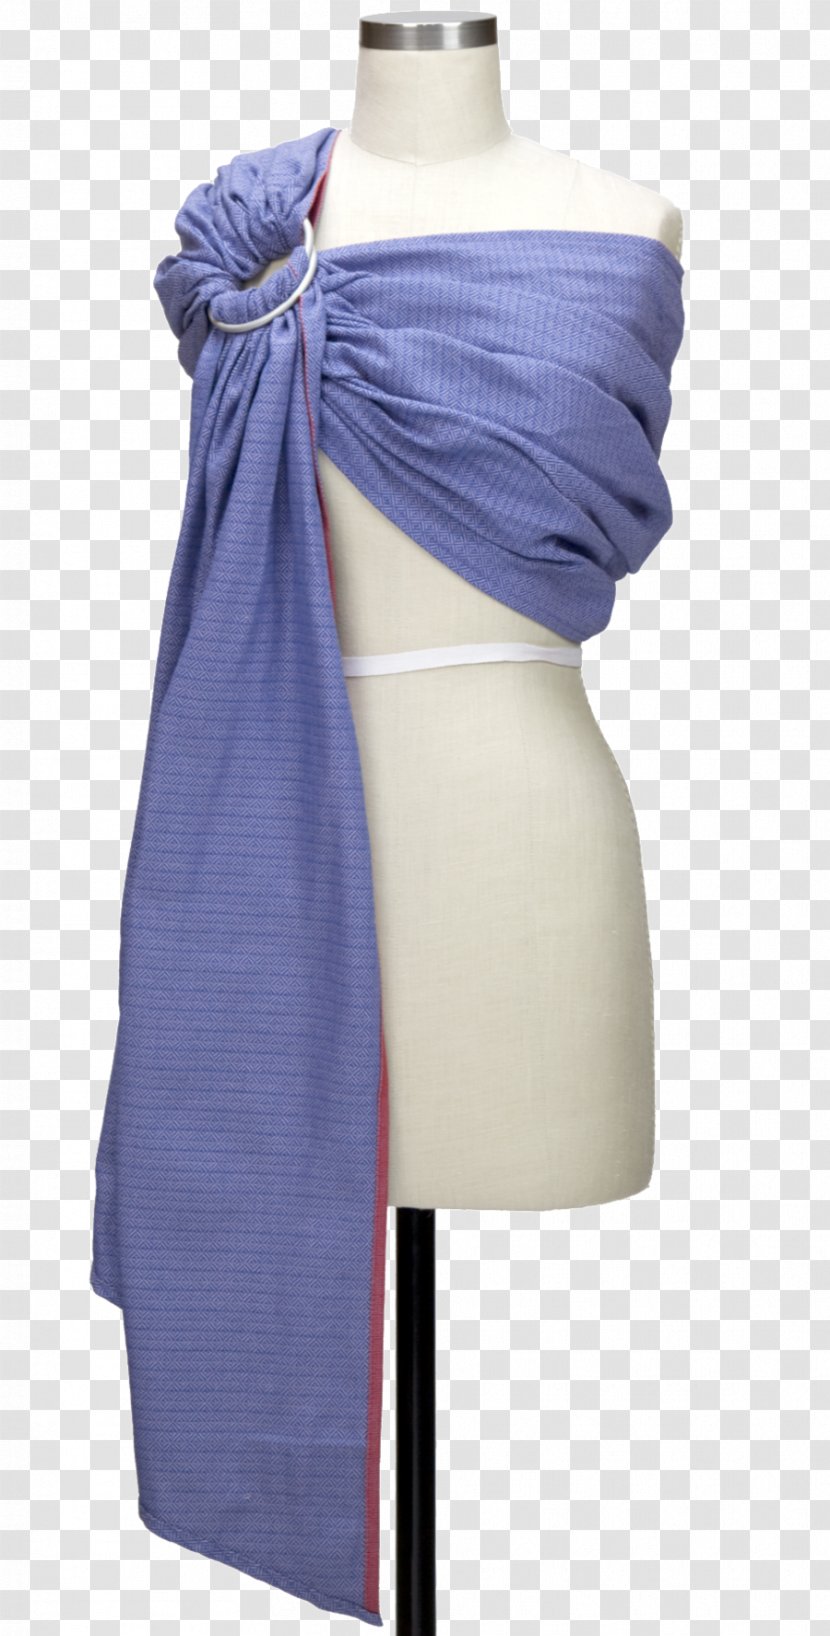 Baby Sling Clothing Accessories Babywearing Scarf - Purple - Year-end Wrap Material Transparent PNG